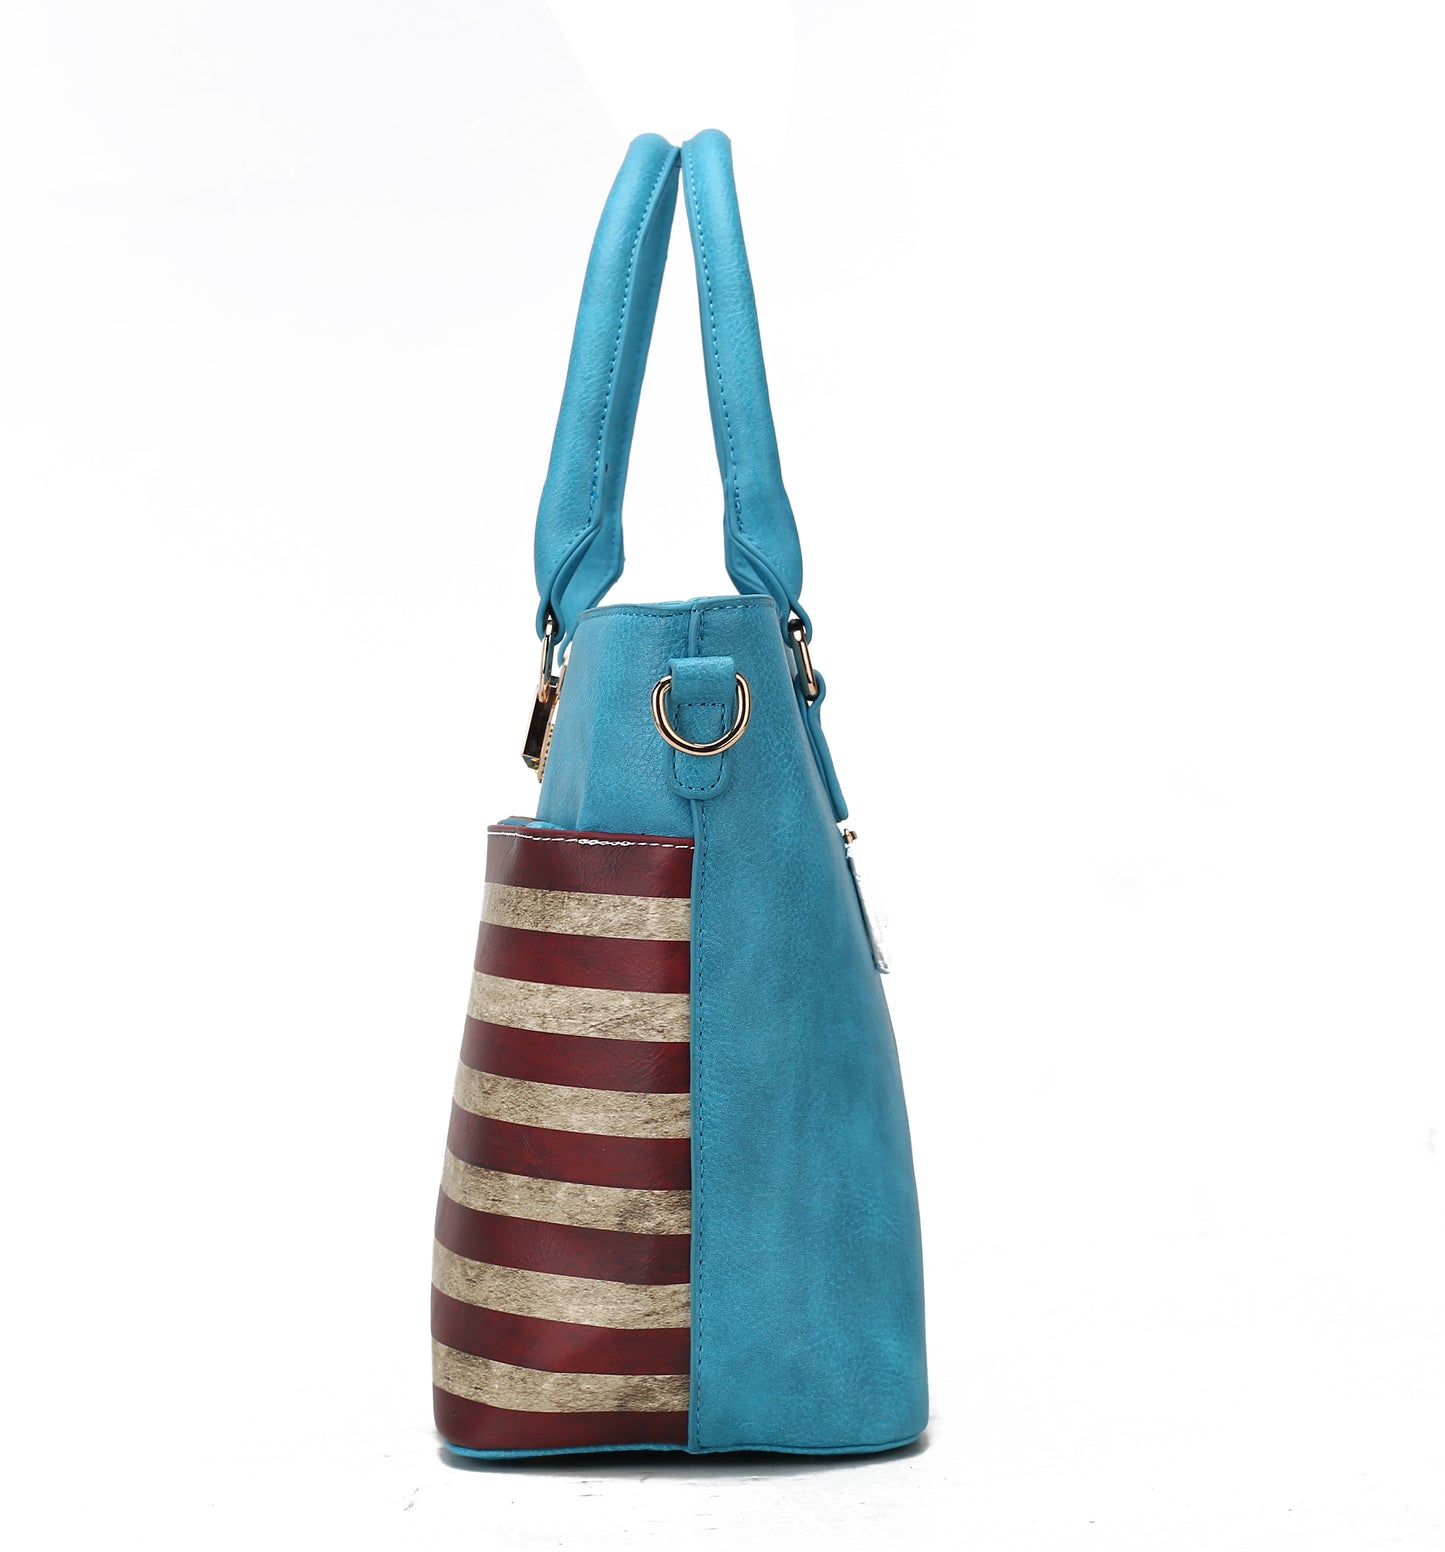 A blue handbag with a red, white and blue stripe inspired by the US flag: Pink Orpheus Lilian Vegan Leather Womens US FLAG Tote Bag.